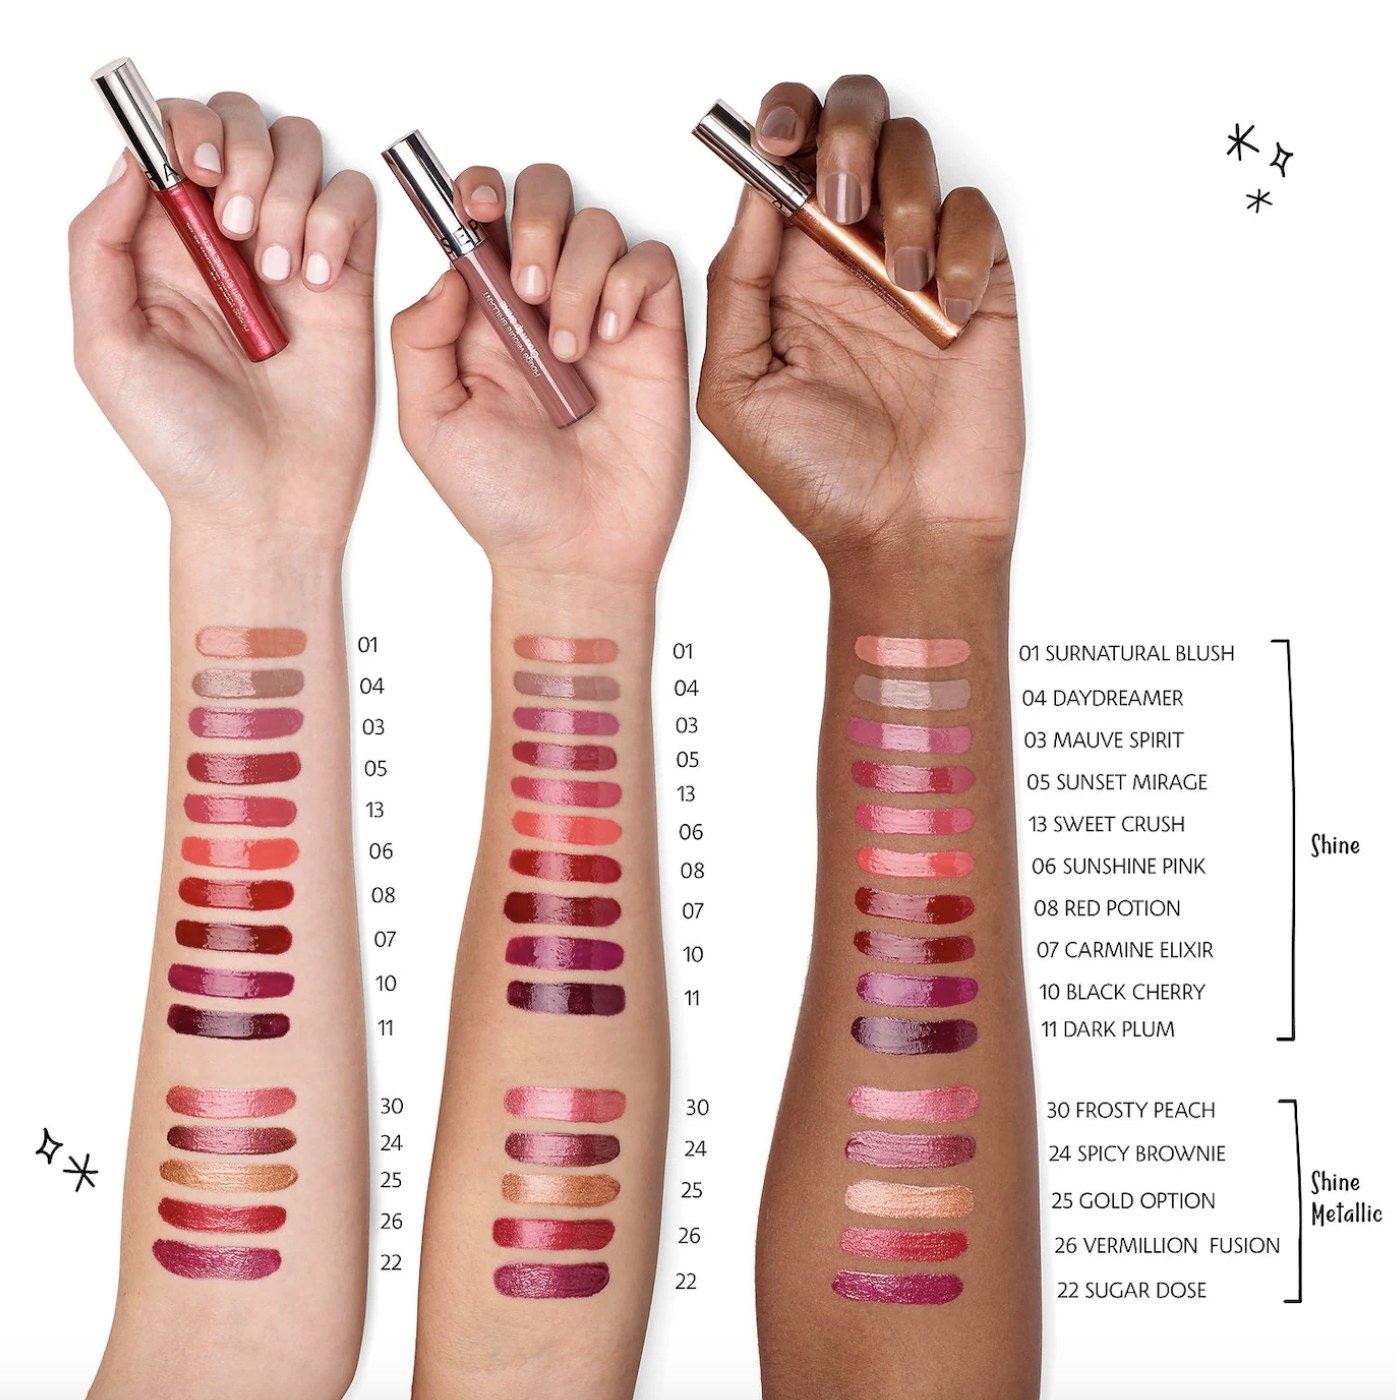 all the shades of the lipsticks swatched on three different skin colors 